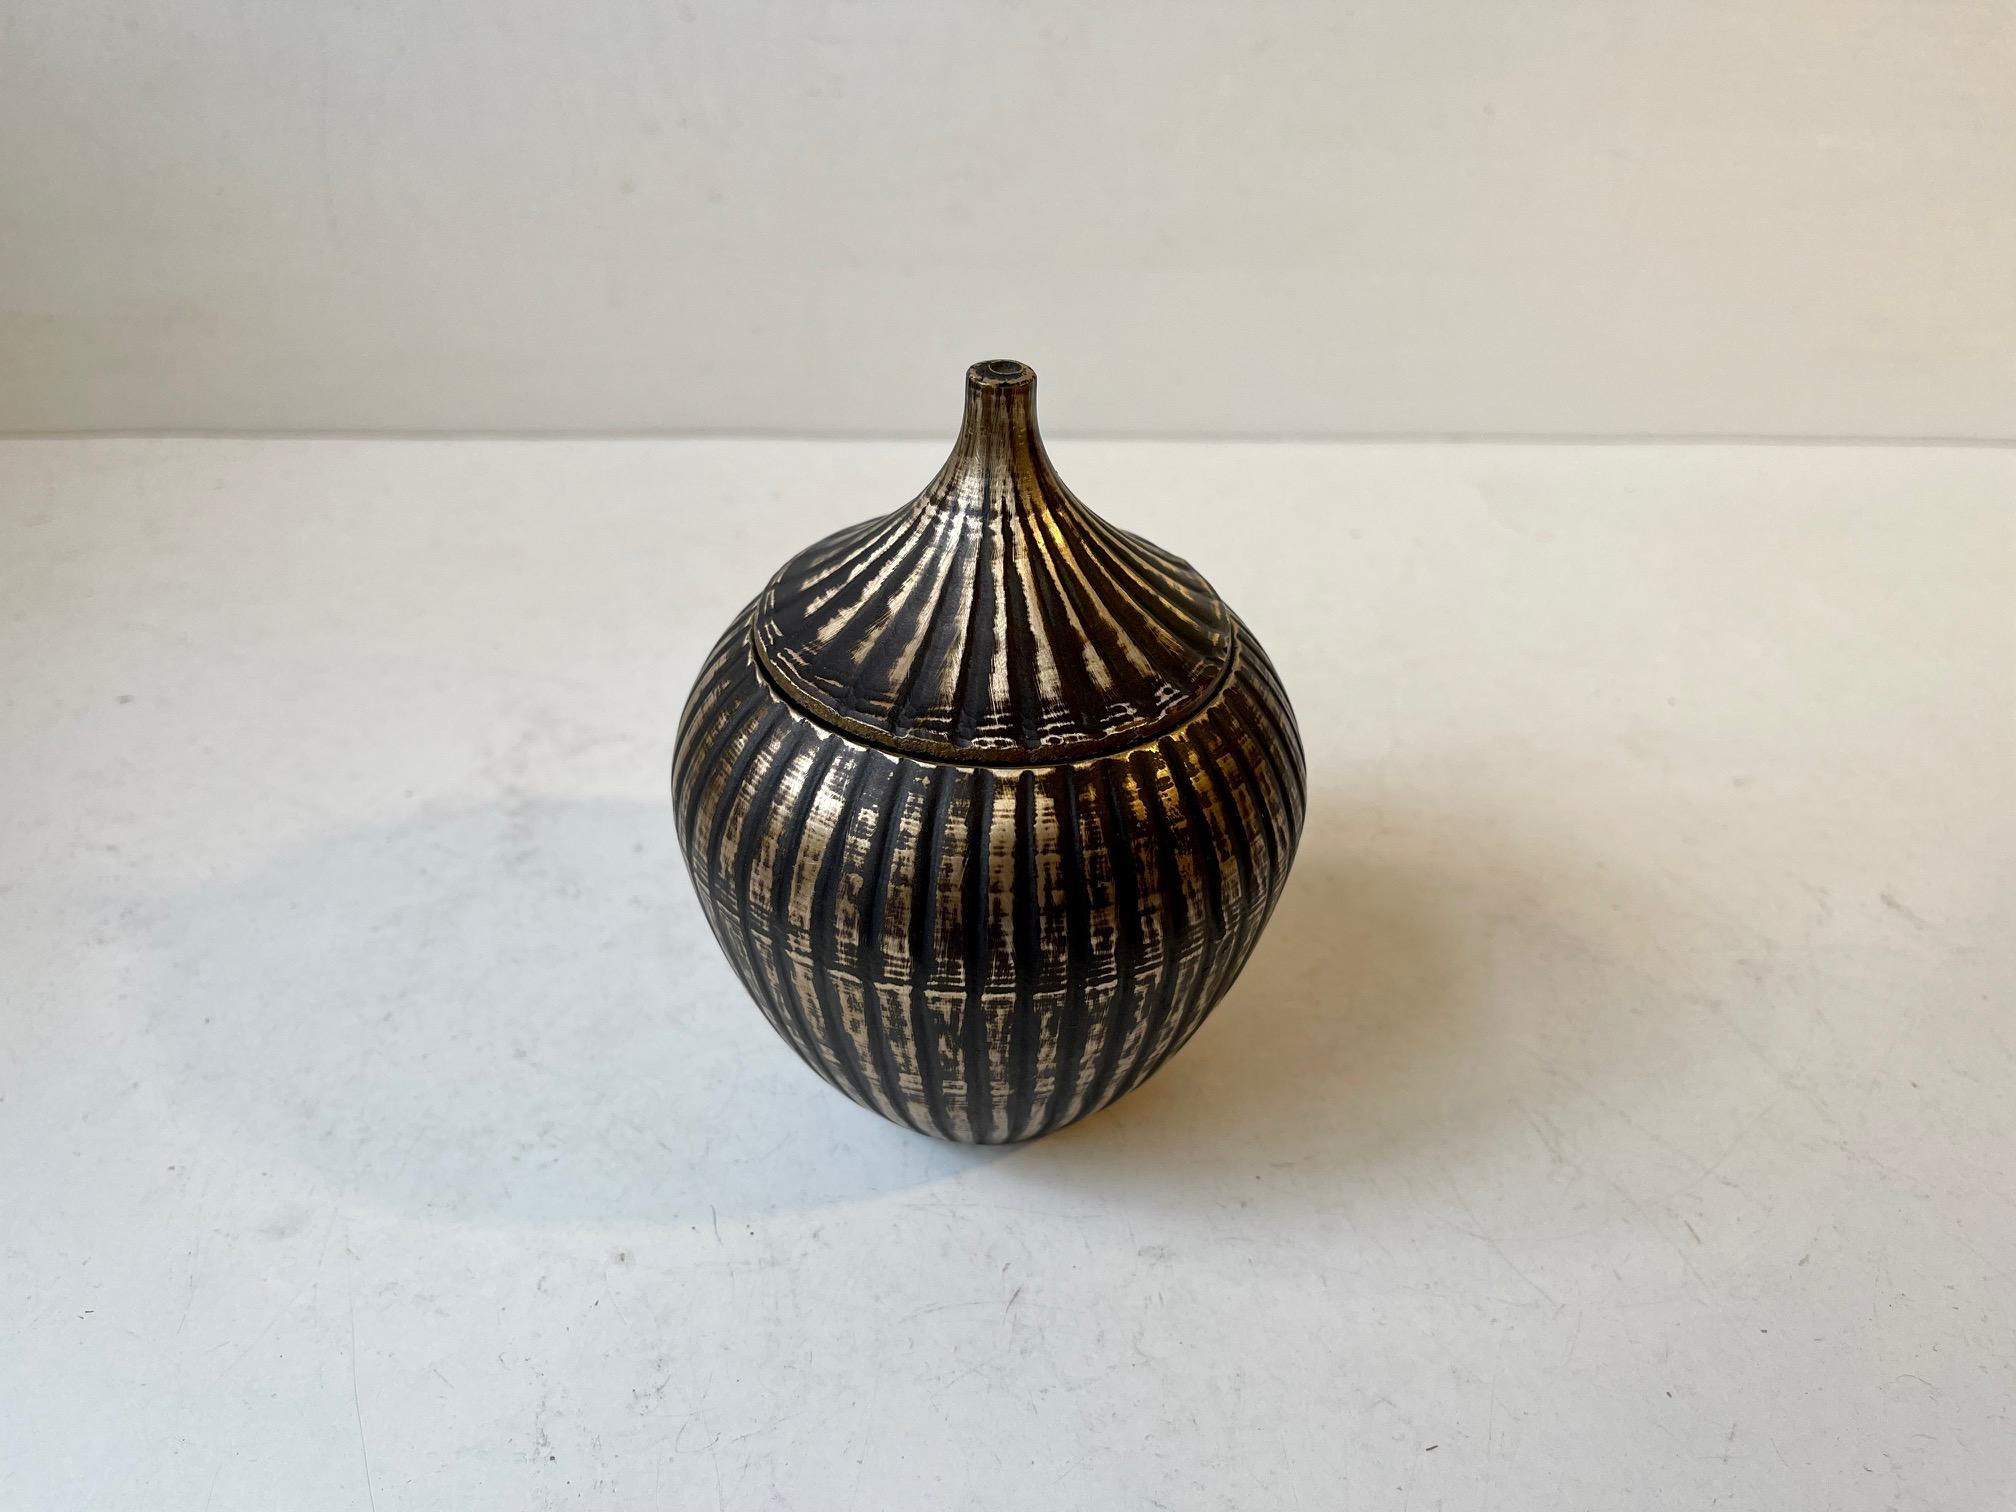 Decorative jar, lidded vase or trinket in solid brass. Cast in the shape of an onion featuring fluted corpus. Partially exposed brass and partially covered with forced patina. Unknown Scandinavian maker in the style of Tinos/Vendor. Despite its